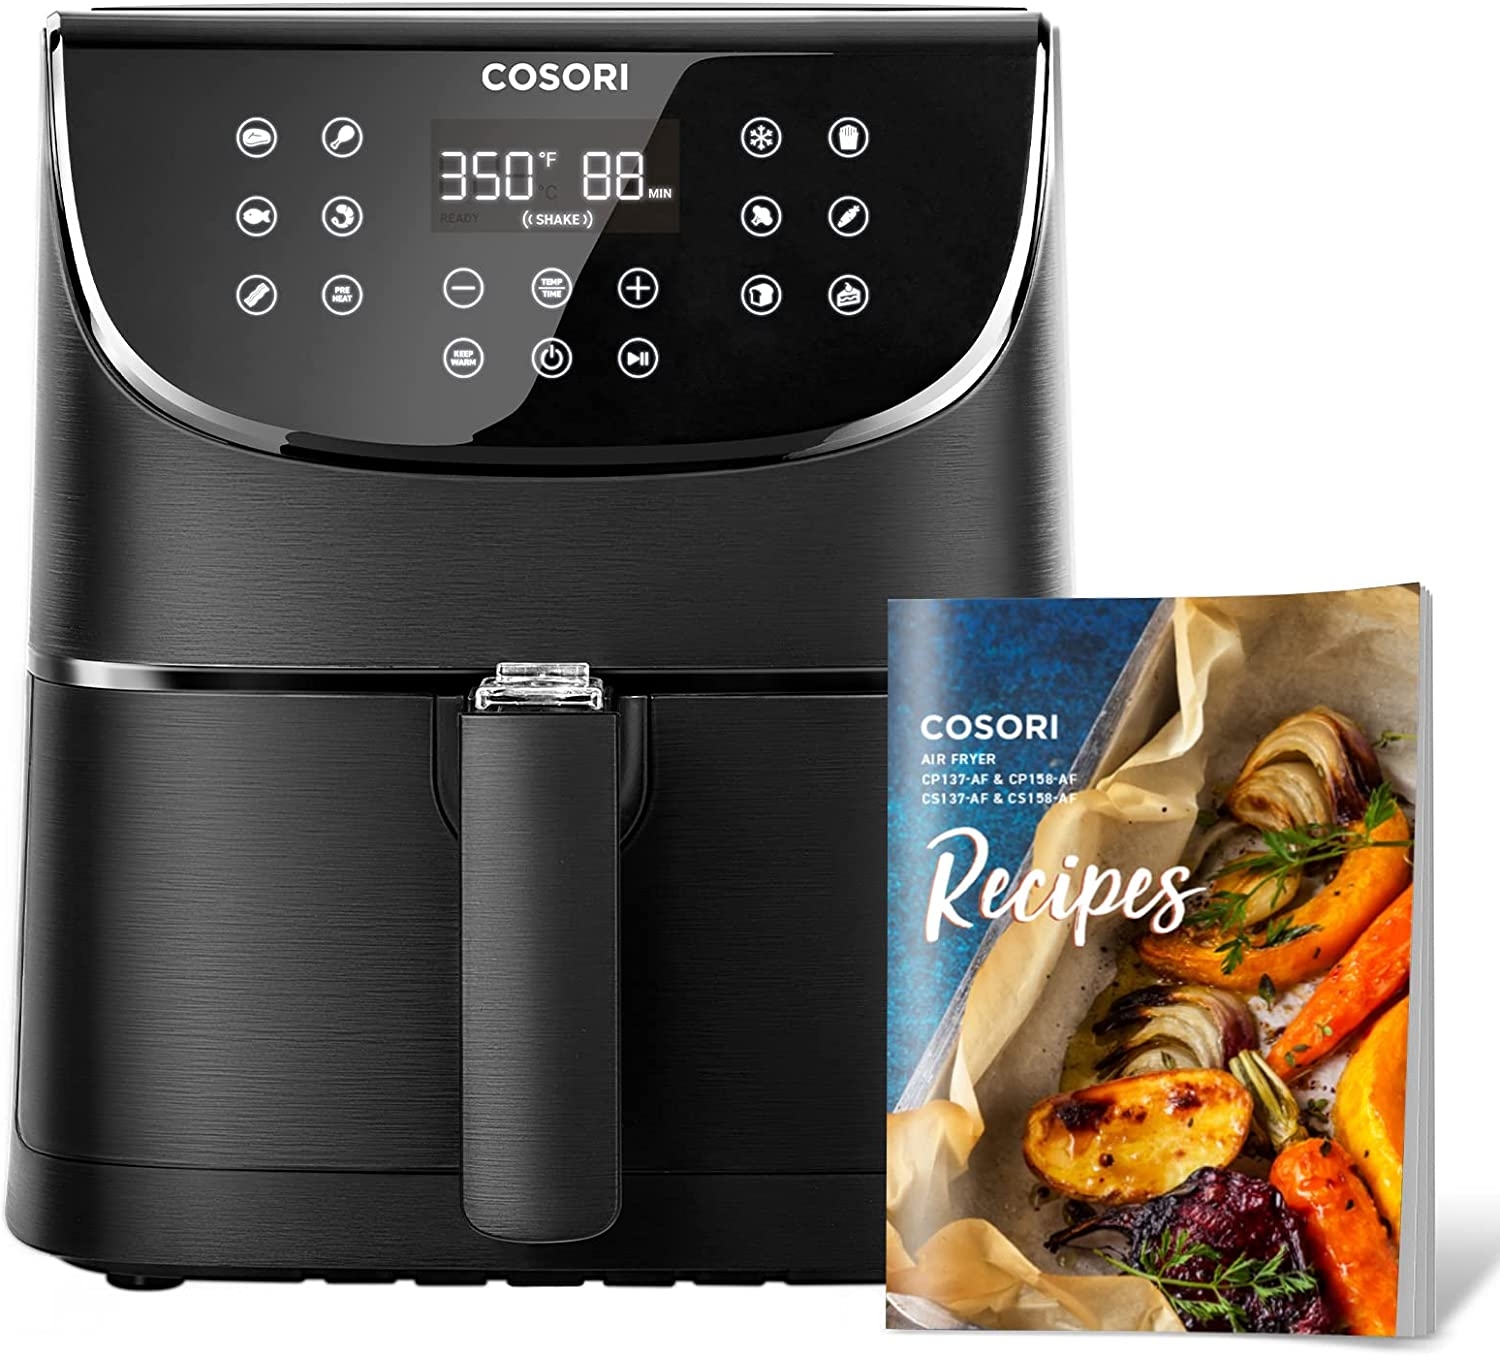 COSORI Pro Air Fryer Oven Combo, 5.8QT Max Xl Large Cooker with 300+ Recipes, One-Touch Screen with 11 Presets and Shake